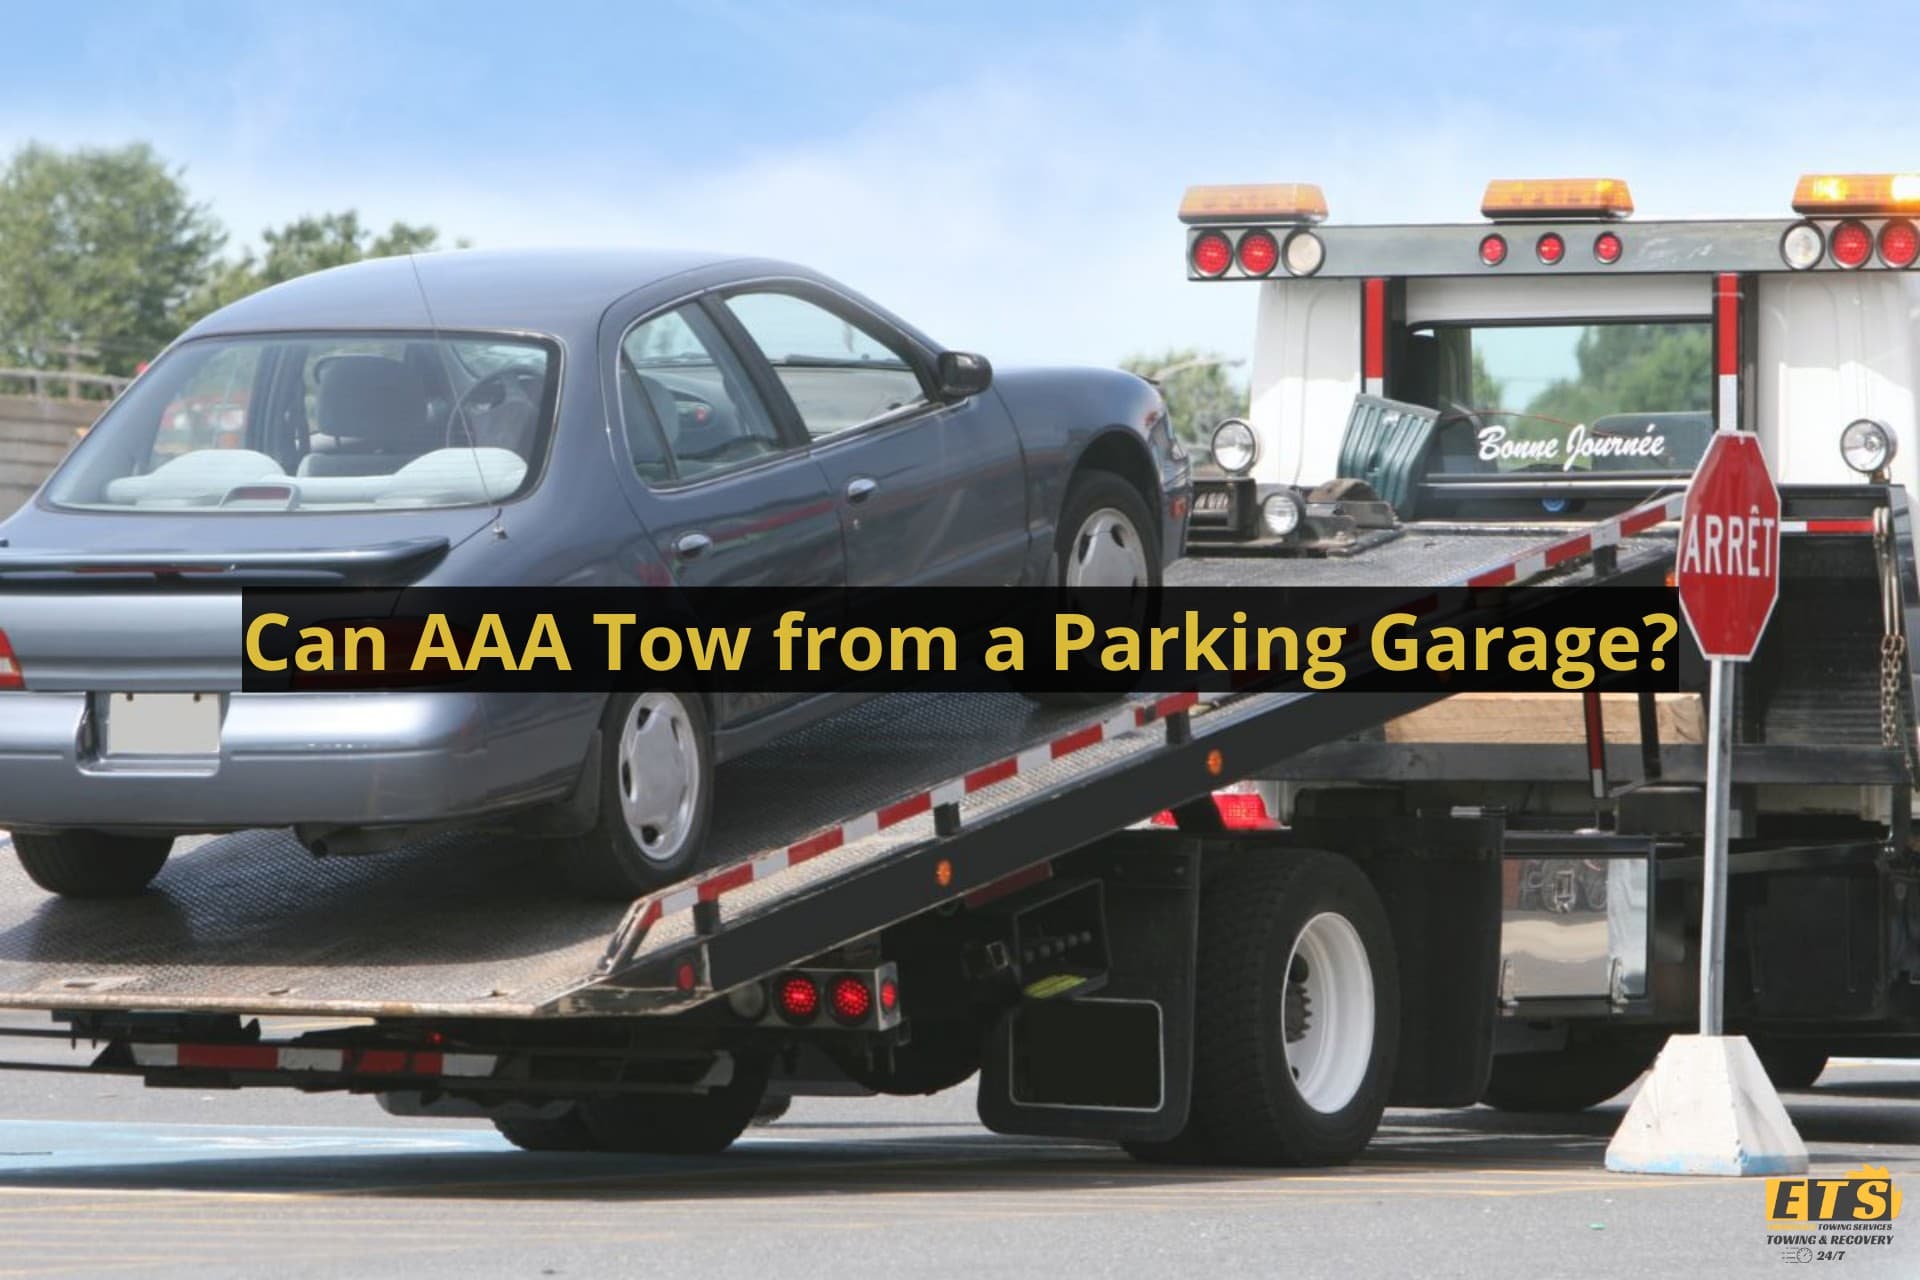 Can AAA Tow from a Parking Garage